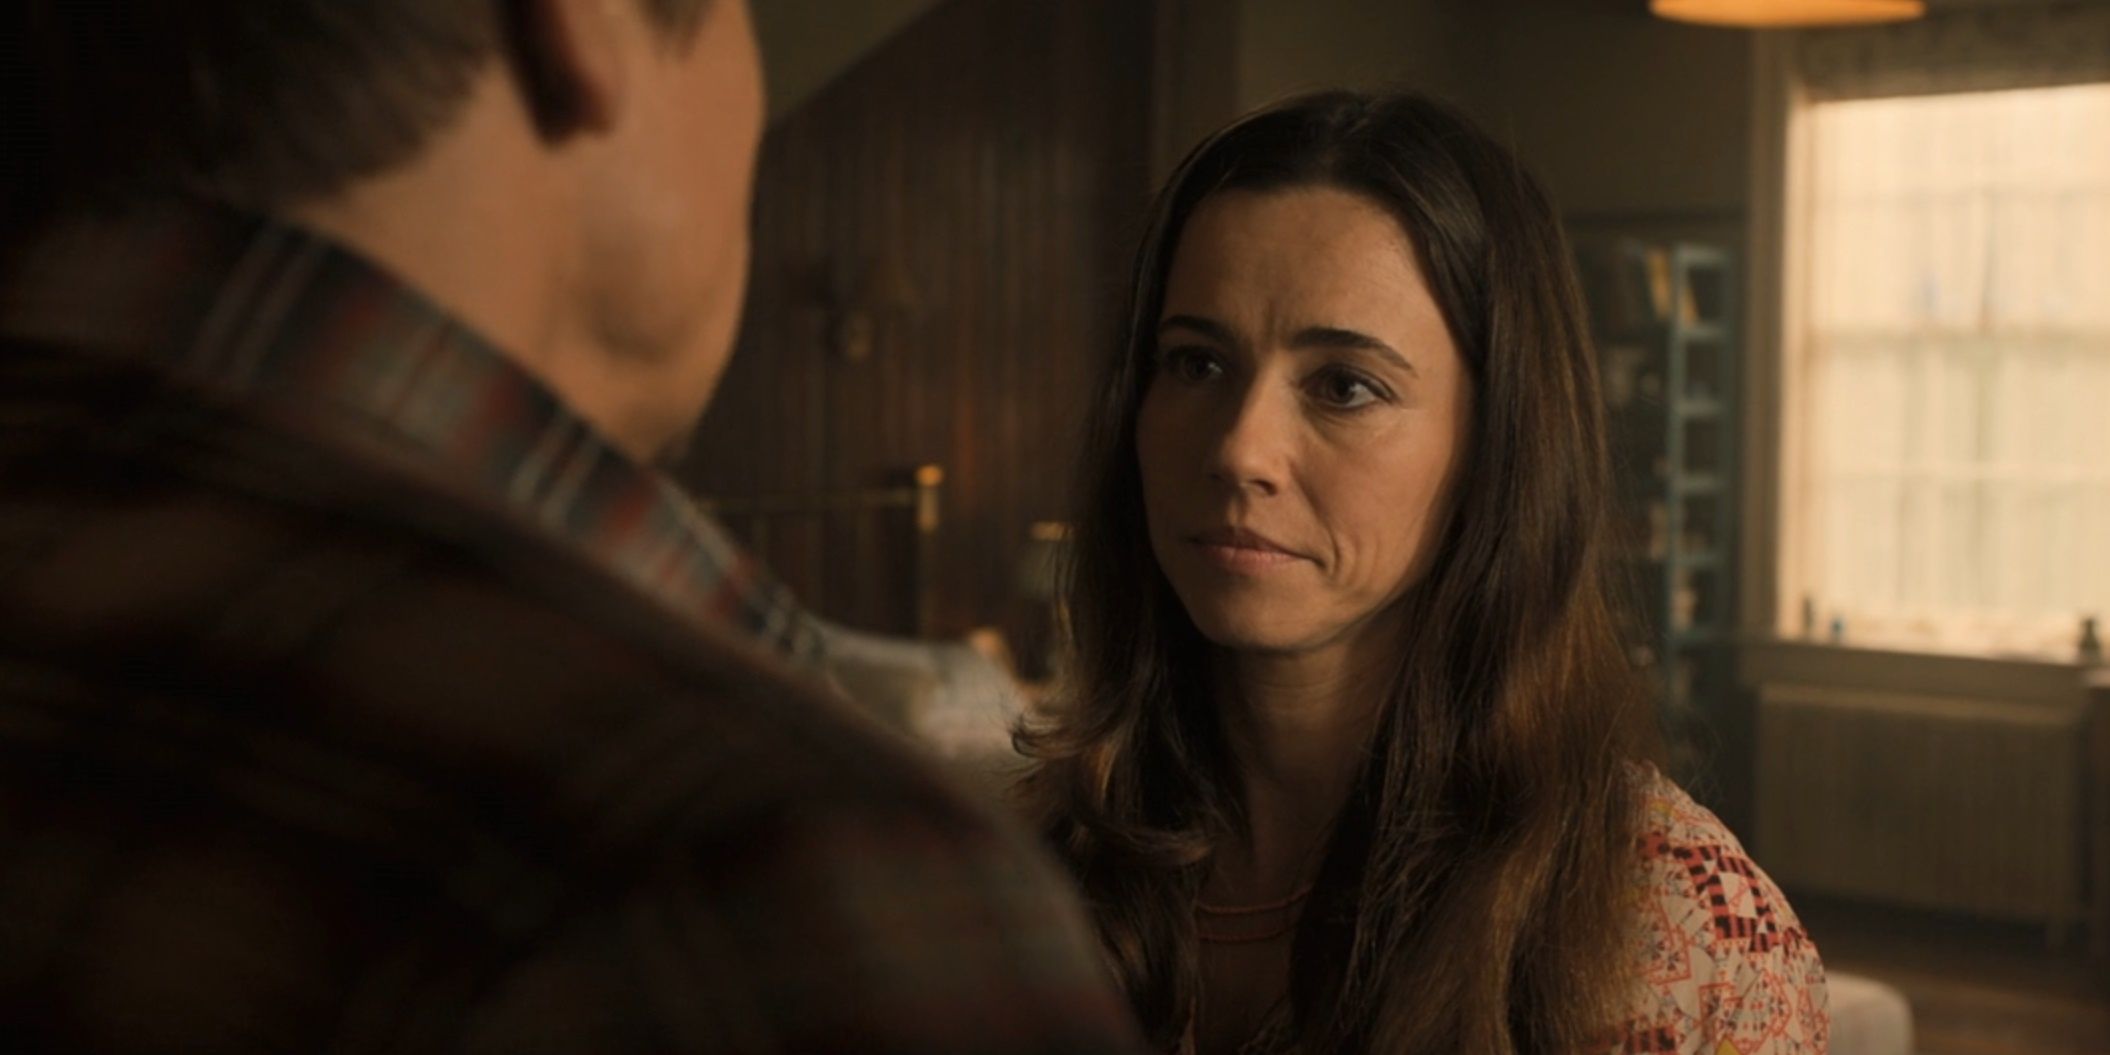 Linda Cardellini as Laura Barton speaks with her husband, Clint Barton, in Avengers: Age of Ultron